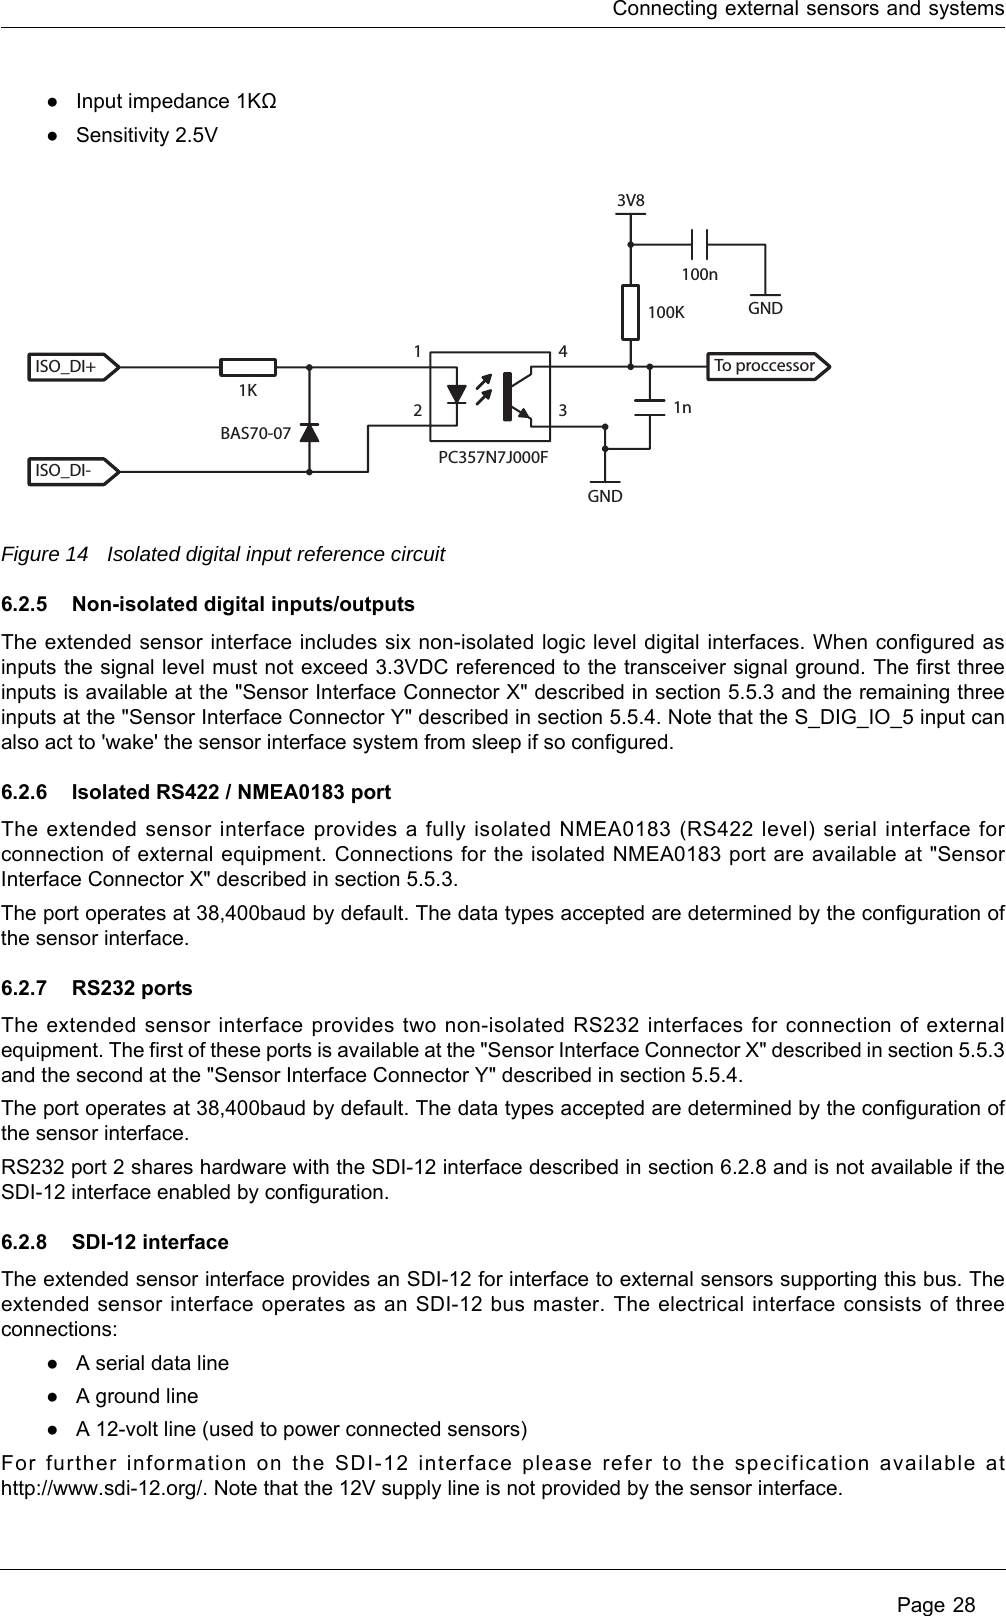 Connecting external sensors and systems Page 28●Input impedance 1KΩ●Sensitivity 2.5VFigure 14 Isolated digital input reference circuit6.2.5 Non-isolated digital inputs/outputsThe extended sensor interface includes six non-isolated logic level digital interfaces. When configured as inputs the signal level must not exceed 3.3VDC referenced to the transceiver signal ground. The first three inputs is available at the &quot;Sensor Interface Connector X&quot; described in section 5.5.3 and the remaining three inputs at the &quot;Sensor Interface Connector Y&quot; described in section 5.5.4. Note that the S_DIG_IO_5 input can also act to &apos;wake&apos; the sensor interface system from sleep if so configured.6.2.6 Isolated RS422 / NMEA0183 portThe extended sensor interface provides a fully isolated NMEA0183 (RS422 level) serial interface for connection of external equipment. Connections for the isolated NMEA0183 port are available at &quot;Sensor Interface Connector X&quot; described in section 5.5.3.The port operates at 38,400baud by default. The data types accepted are determined by the configuration of the sensor interface.6.2.7 RS232 portsThe extended sensor interface provides two non-isolated RS232 interfaces for connection of external equipment. The first of these ports is available at the &quot;Sensor Interface Connector X&quot; described in section 5.5.3 and the second at the &quot;Sensor Interface Connector Y&quot; described in section 5.5.4.The port operates at 38,400baud by default. The data types accepted are determined by the configuration of the sensor interface. RS232 port 2 shares hardware with the SDI-12 interface described in section 6.2.8 and is not available if the SDI-12 interface enabled by configuration.6.2.8 SDI-12 interfaceThe extended sensor interface provides an SDI-12 for interface to external sensors supporting this bus. The extended sensor interface operates as an SDI-12 bus master. The electrical interface consists of three connections:●A serial data line●A ground line●A 12-volt line (used to power connected sensors)For further information on the SDI-12 interface please refer to the specification available at http://www.sdi-12.org/. Note that the 12V supply line is not provided by the sensor interface.ISO_DI+ To proccessor1K100K100n1n3V8GNDGND1243BAS70-07PC357N7J000FISO_DI-